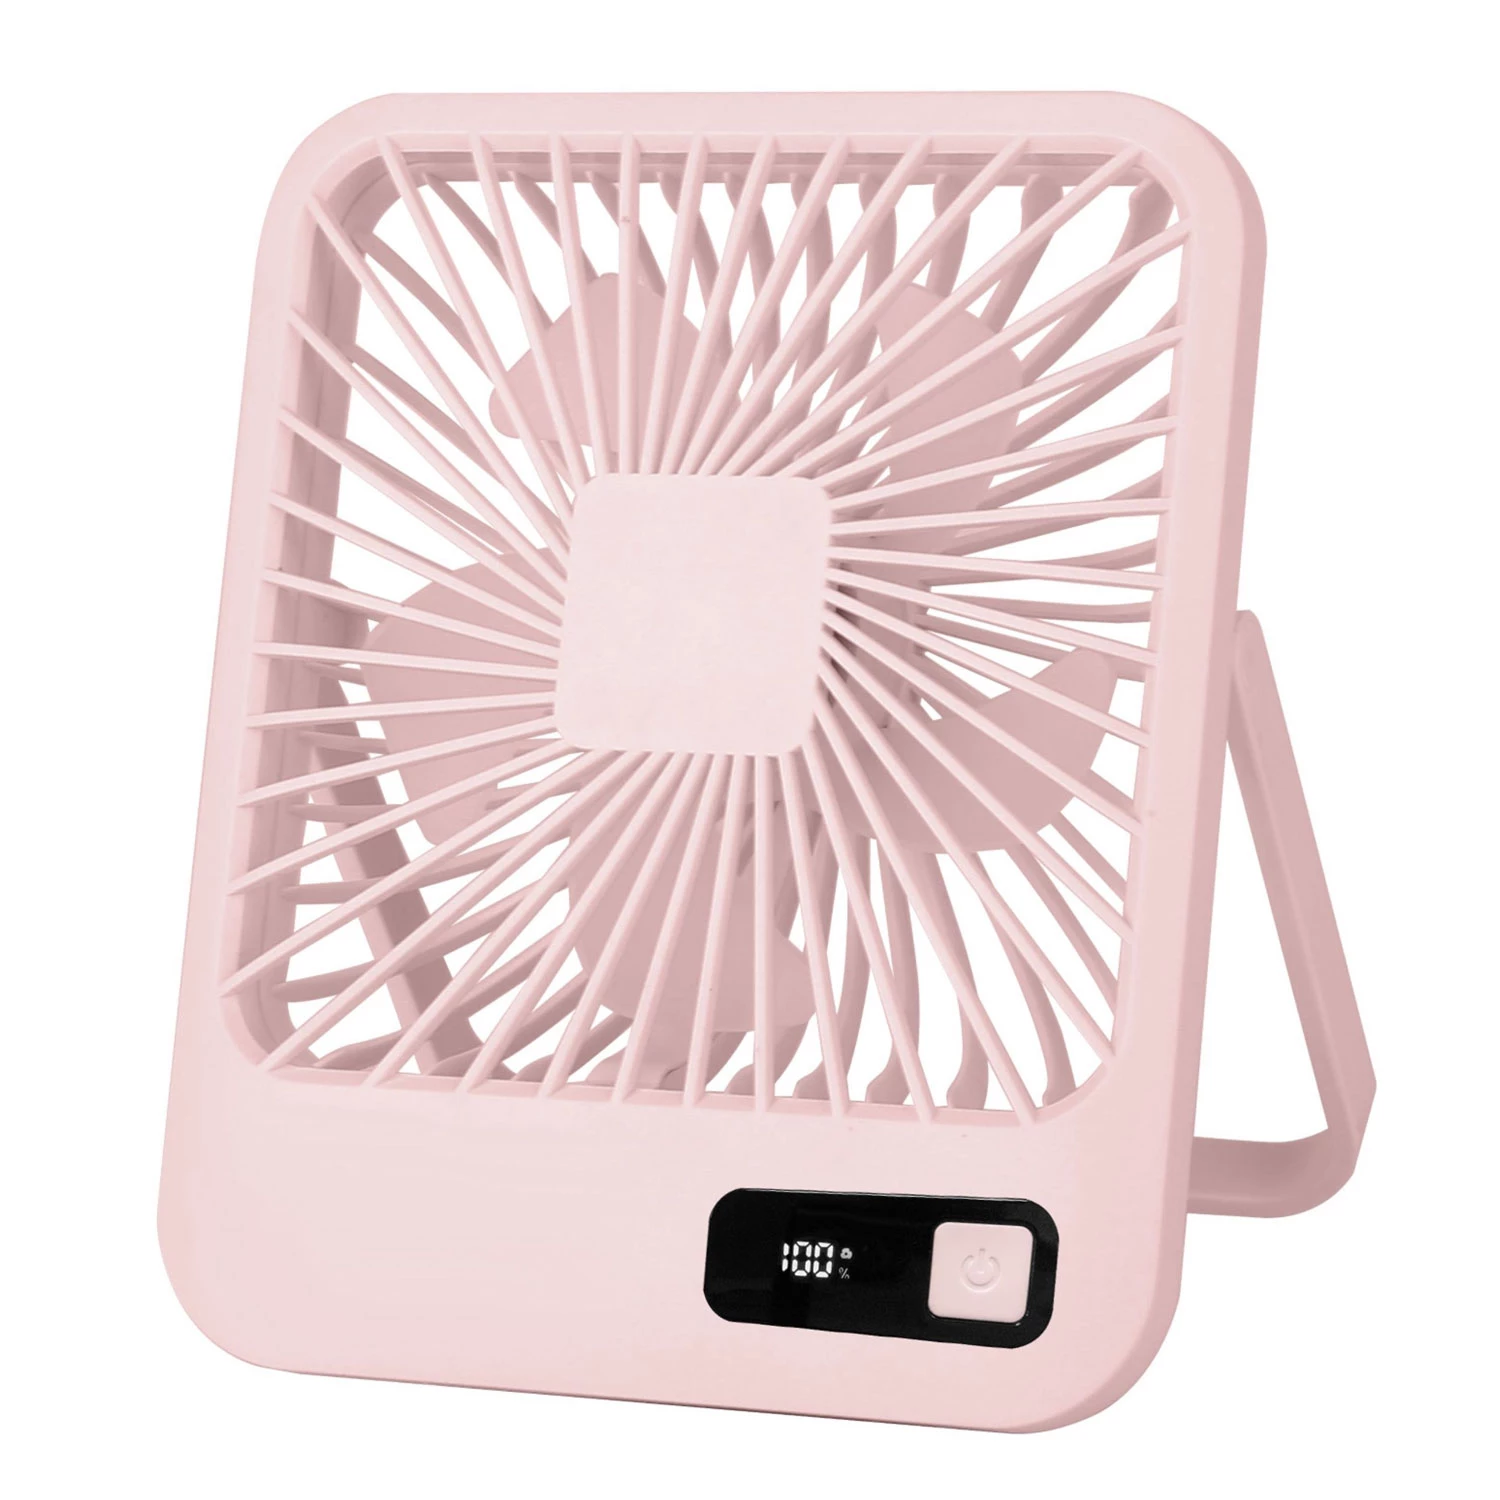 Portable Rechargeable Mini Fan: LCD Display, Adjustable Speed, Strong Airflow